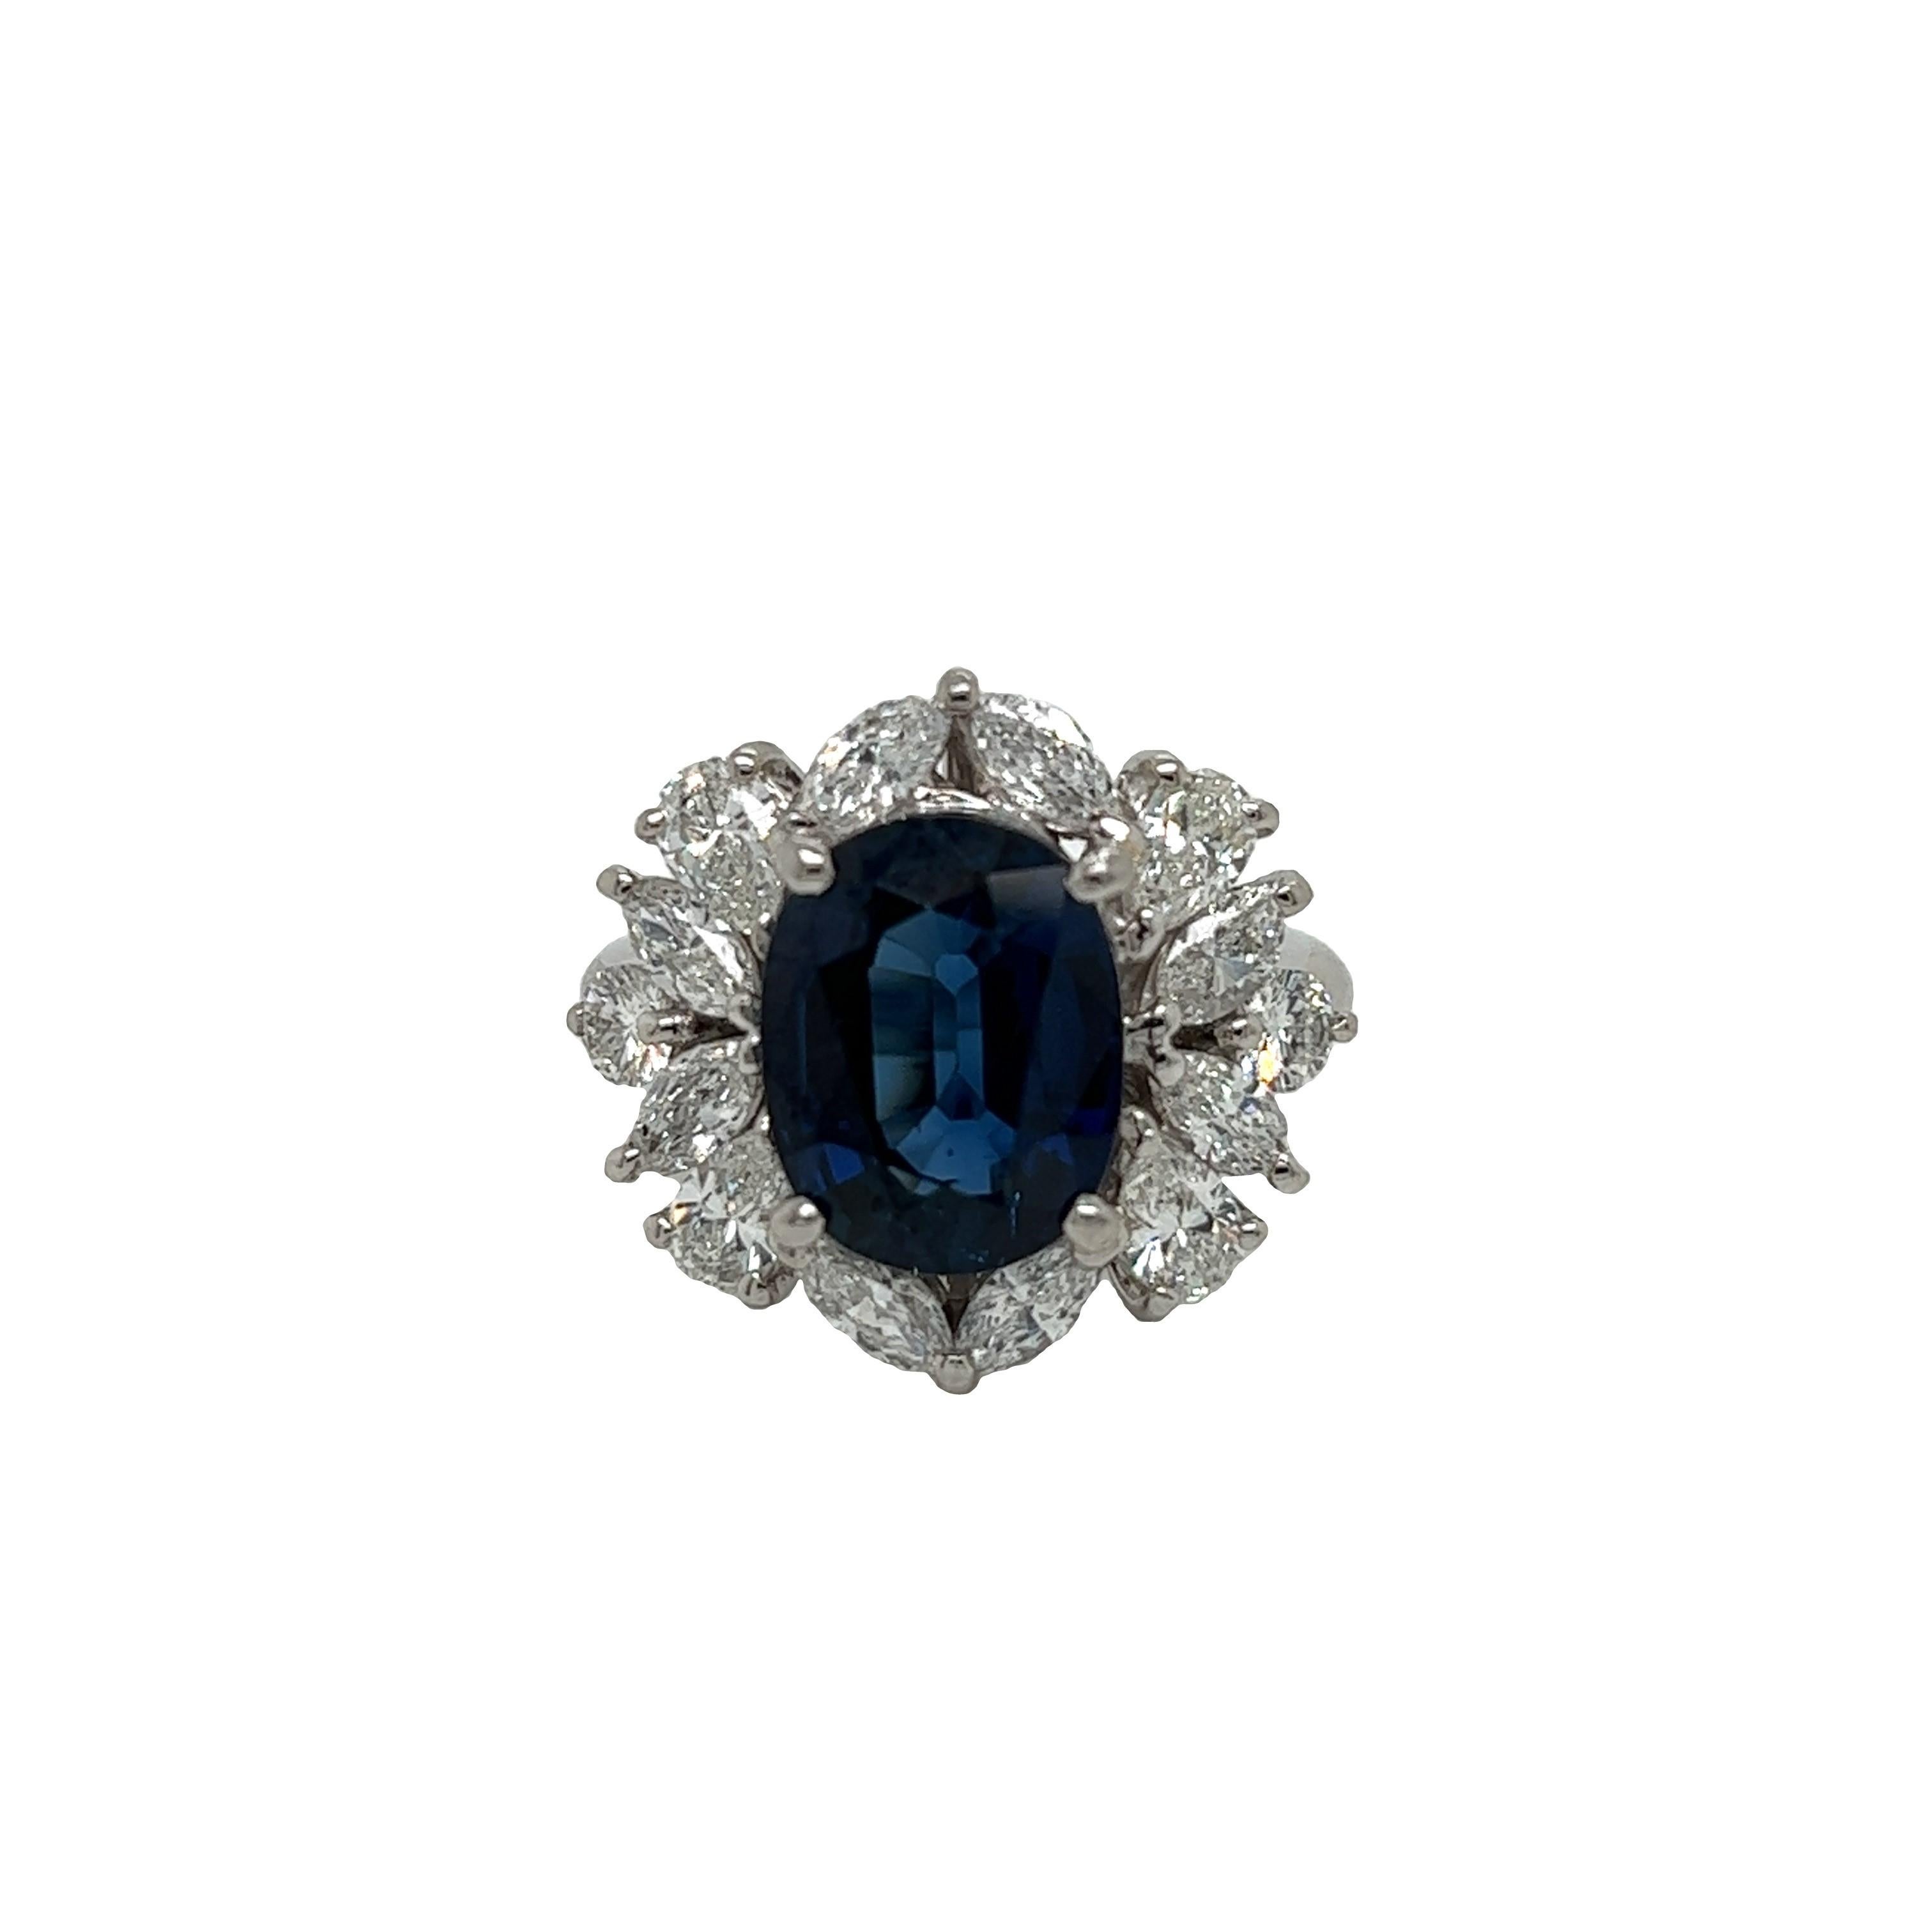 In a vintage platinum setting, a stunning Oval Sapphire is surrounded by sparkling diamonds. This was framed with a superb pure Oval Sapphire. The ring is a real showpiece.
*****
Details:
►Metal: Platinum
►Natural Gemstone: Natural